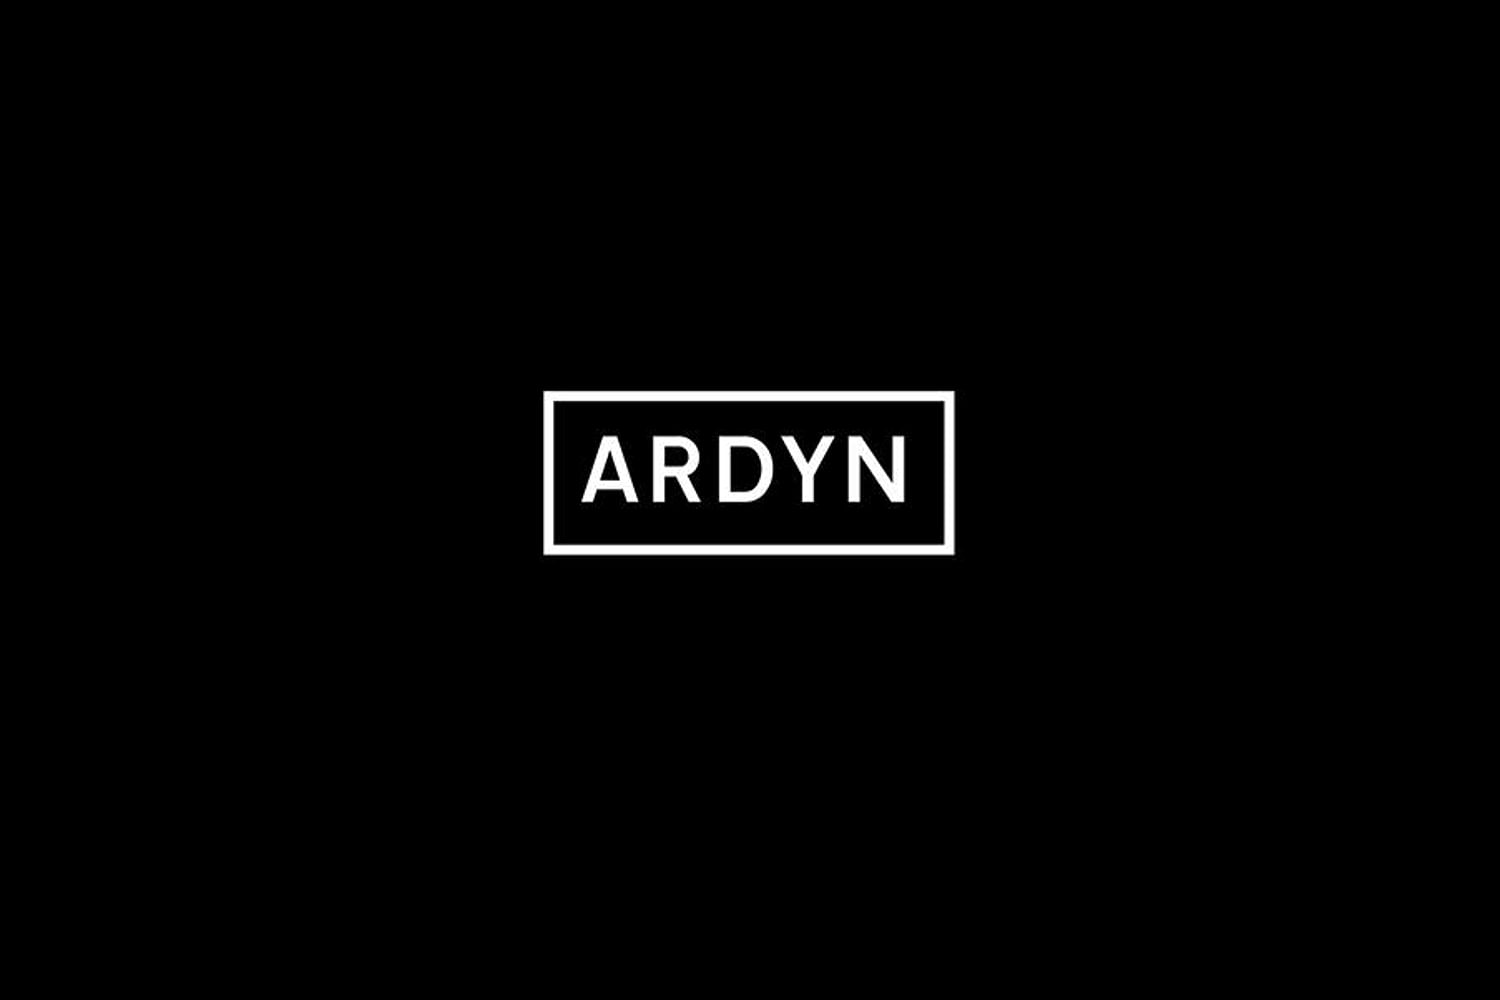 Ardyn share debut track ‘Universe’